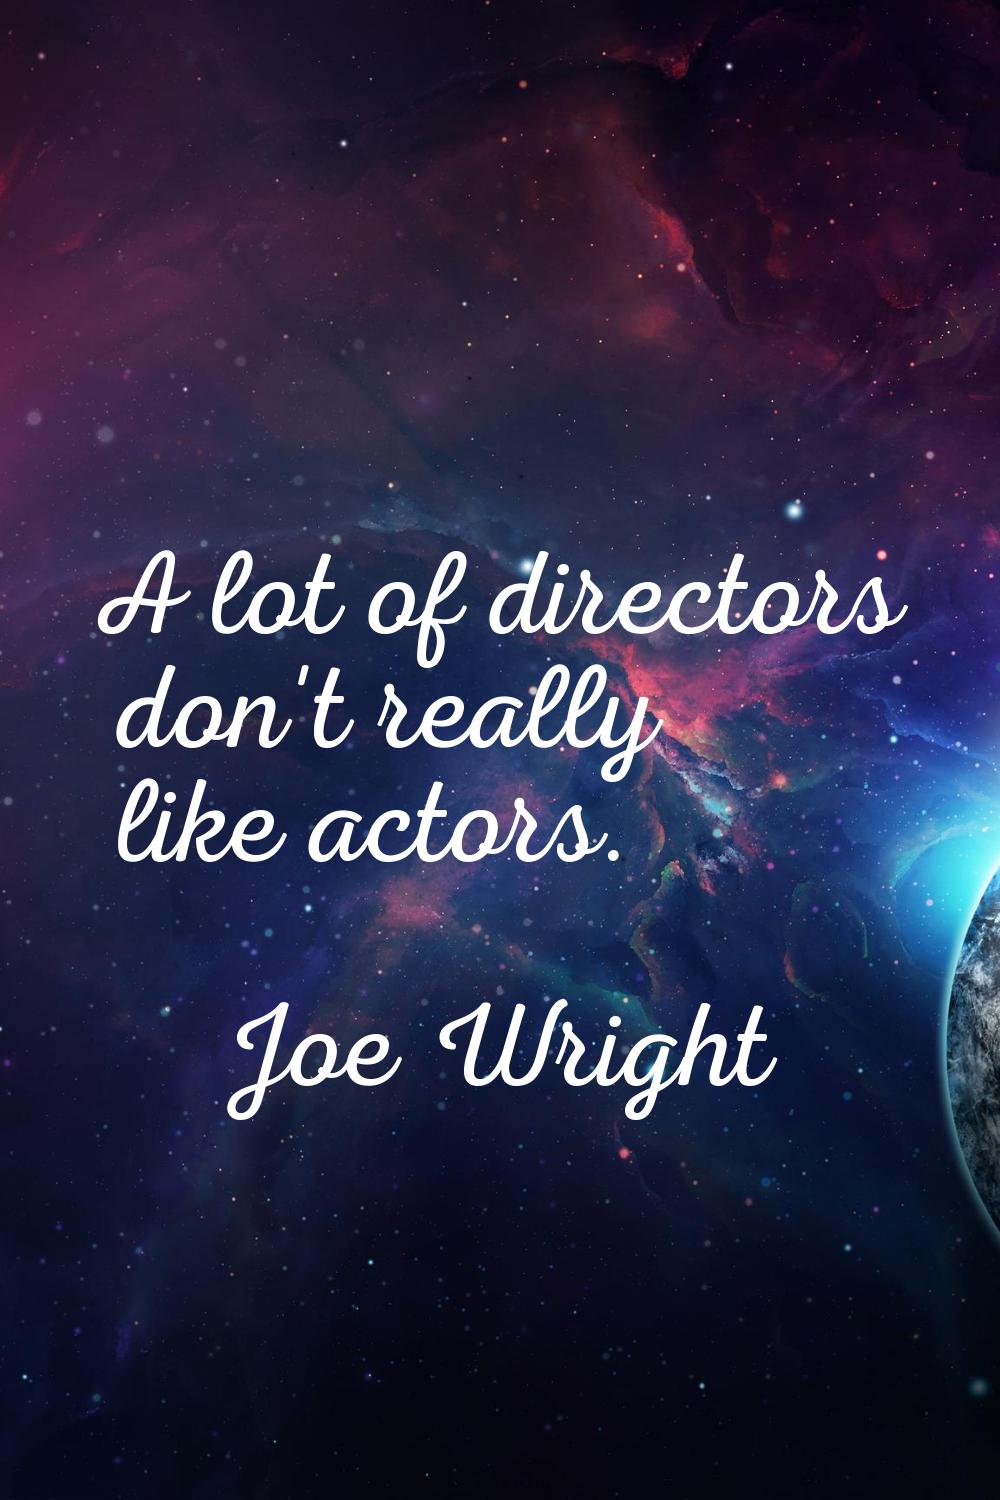 A lot of directors don't really like actors.